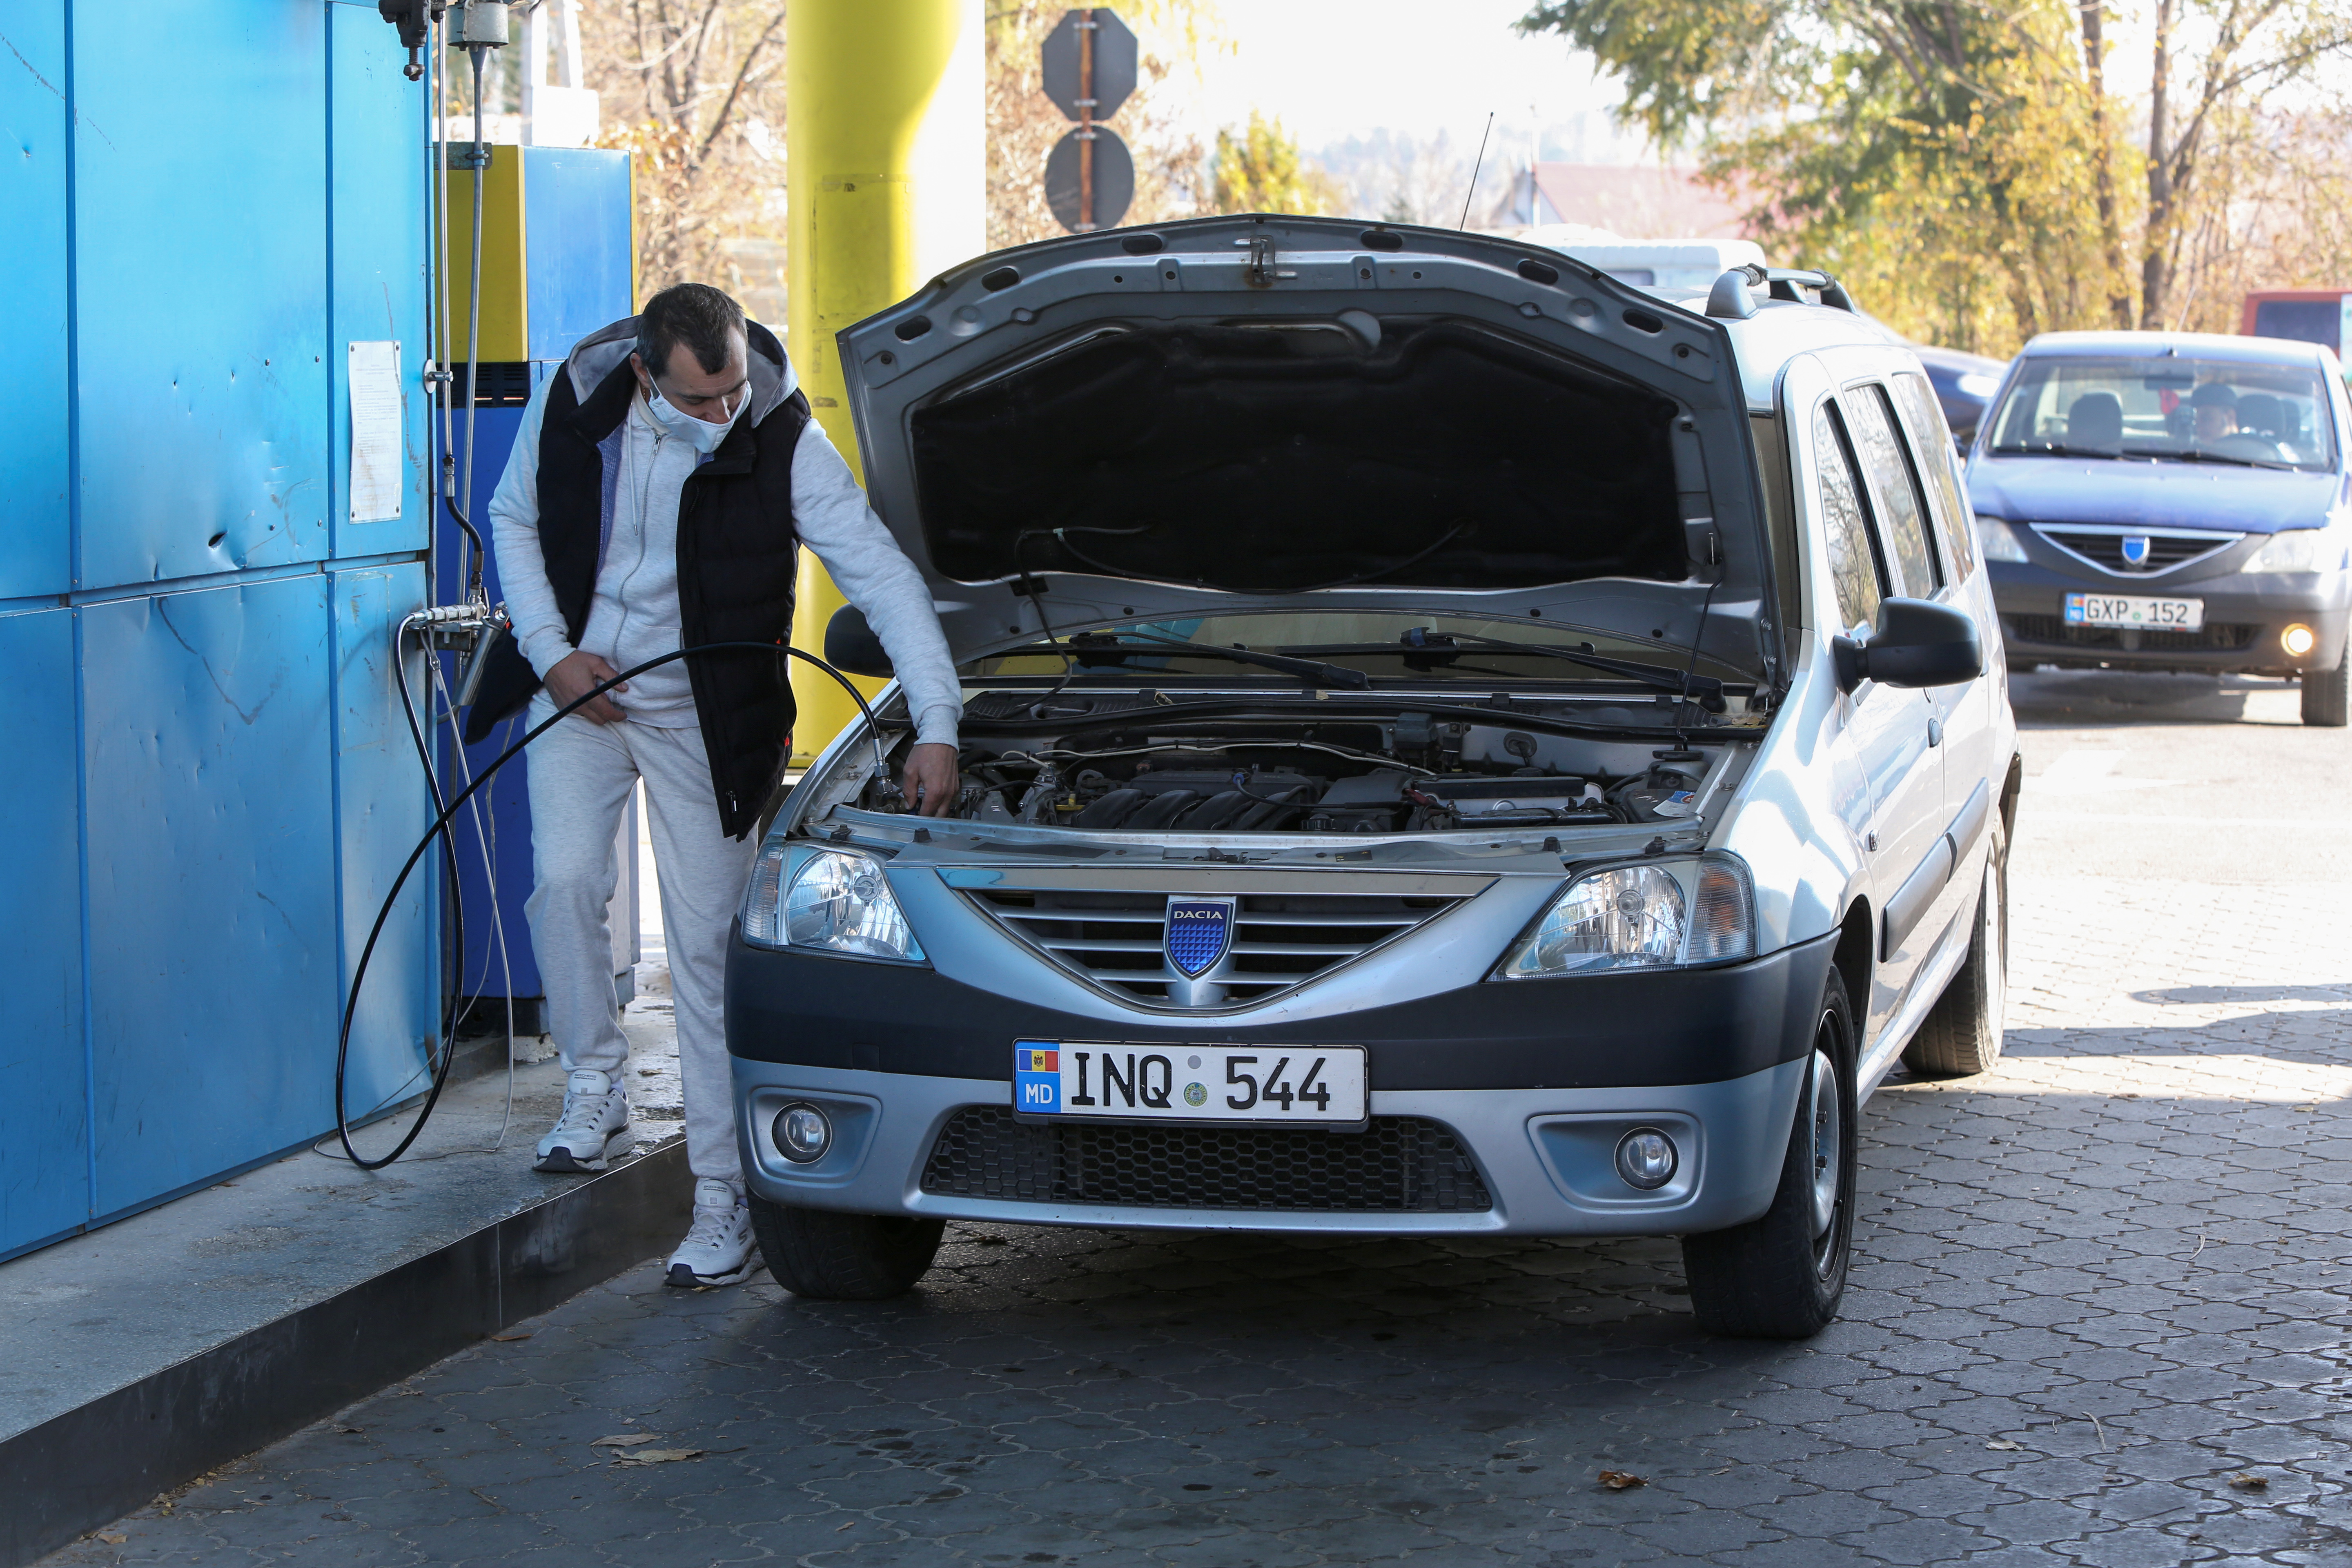 A man fills a car with natural gas at a fuel station in Chisinau